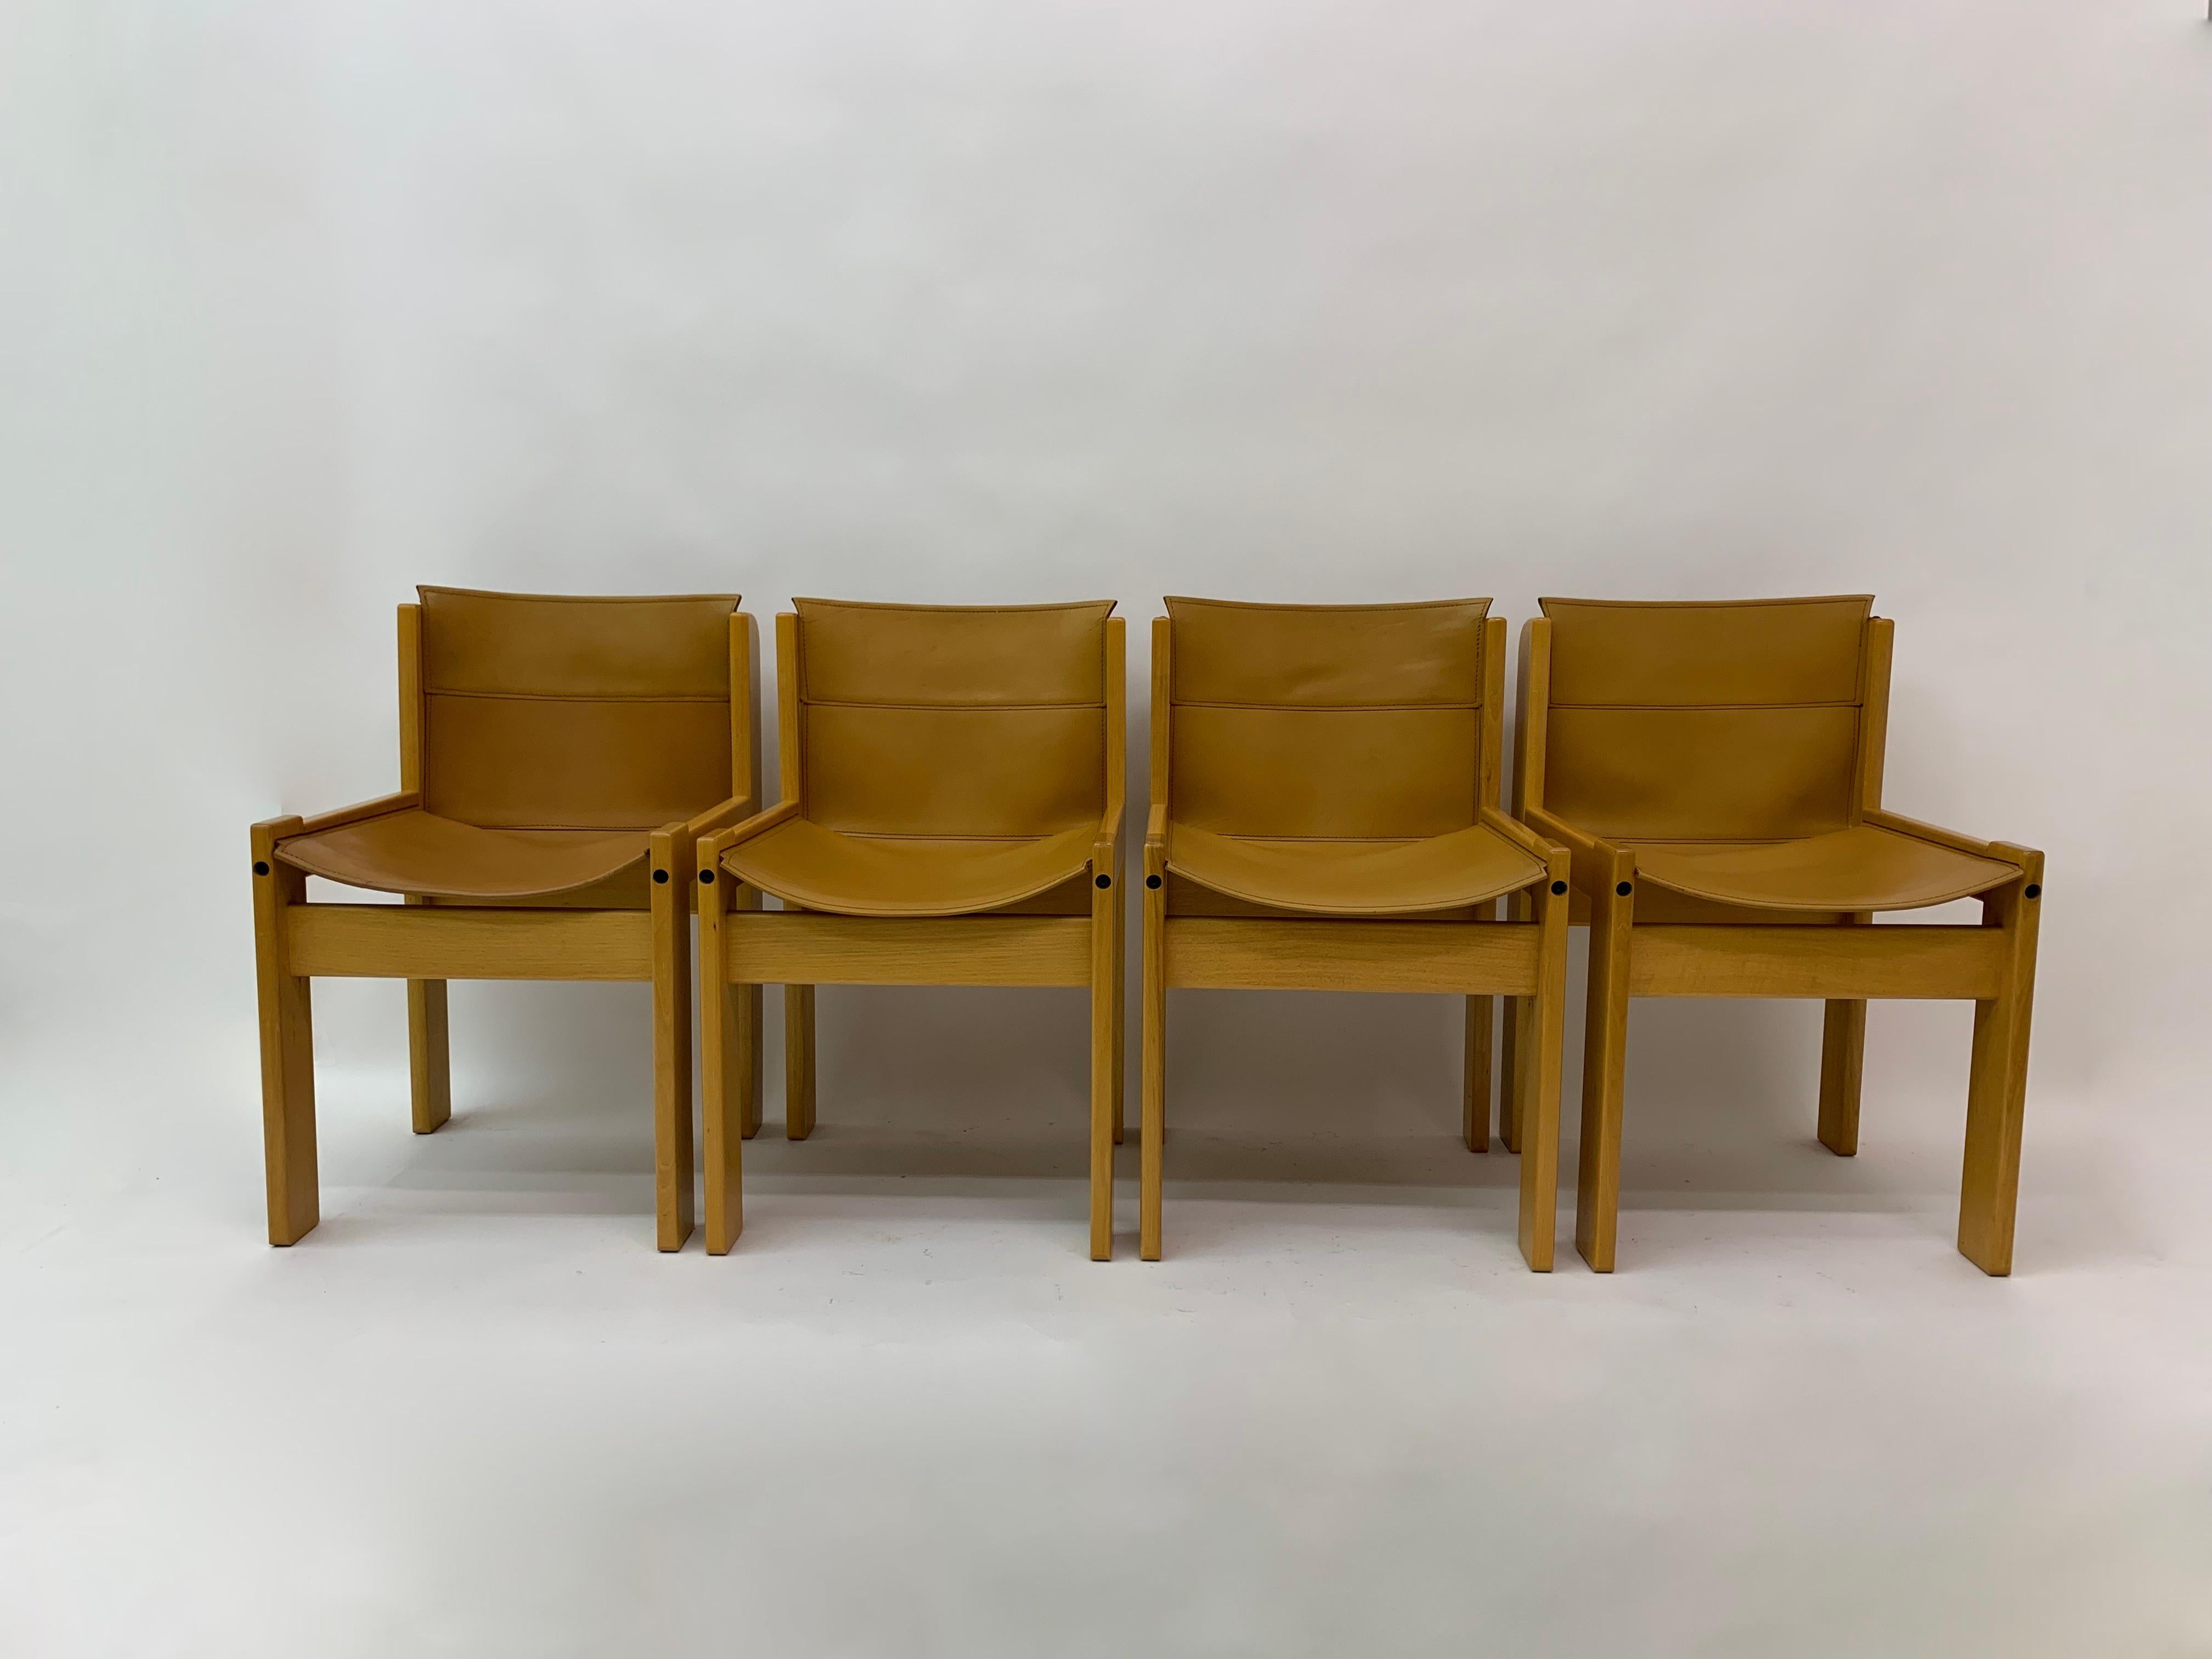 Set of 4 Vintage Italian Dining Chairs from Ibisco, 1970s

Dimensions: 48cmW, 43-47cm H seat, 51cm D, 76.5vm H
Period:1970’s
Material: Leather, Wood